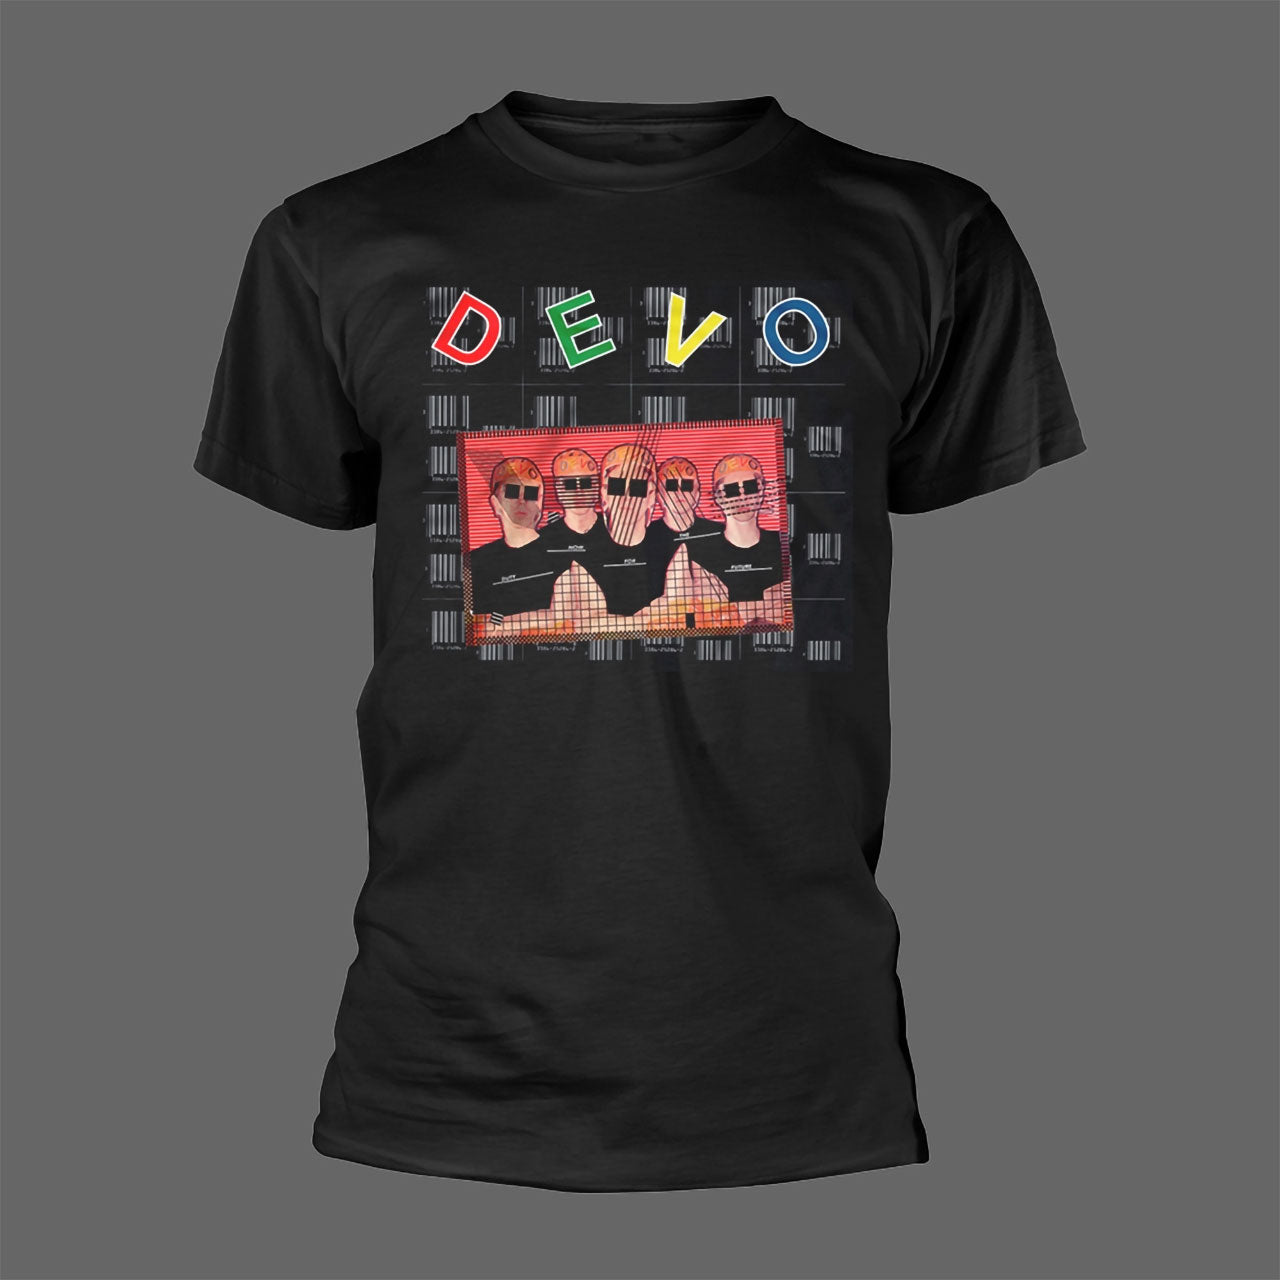 Devo - Duty Now for the Future (T-Shirt)